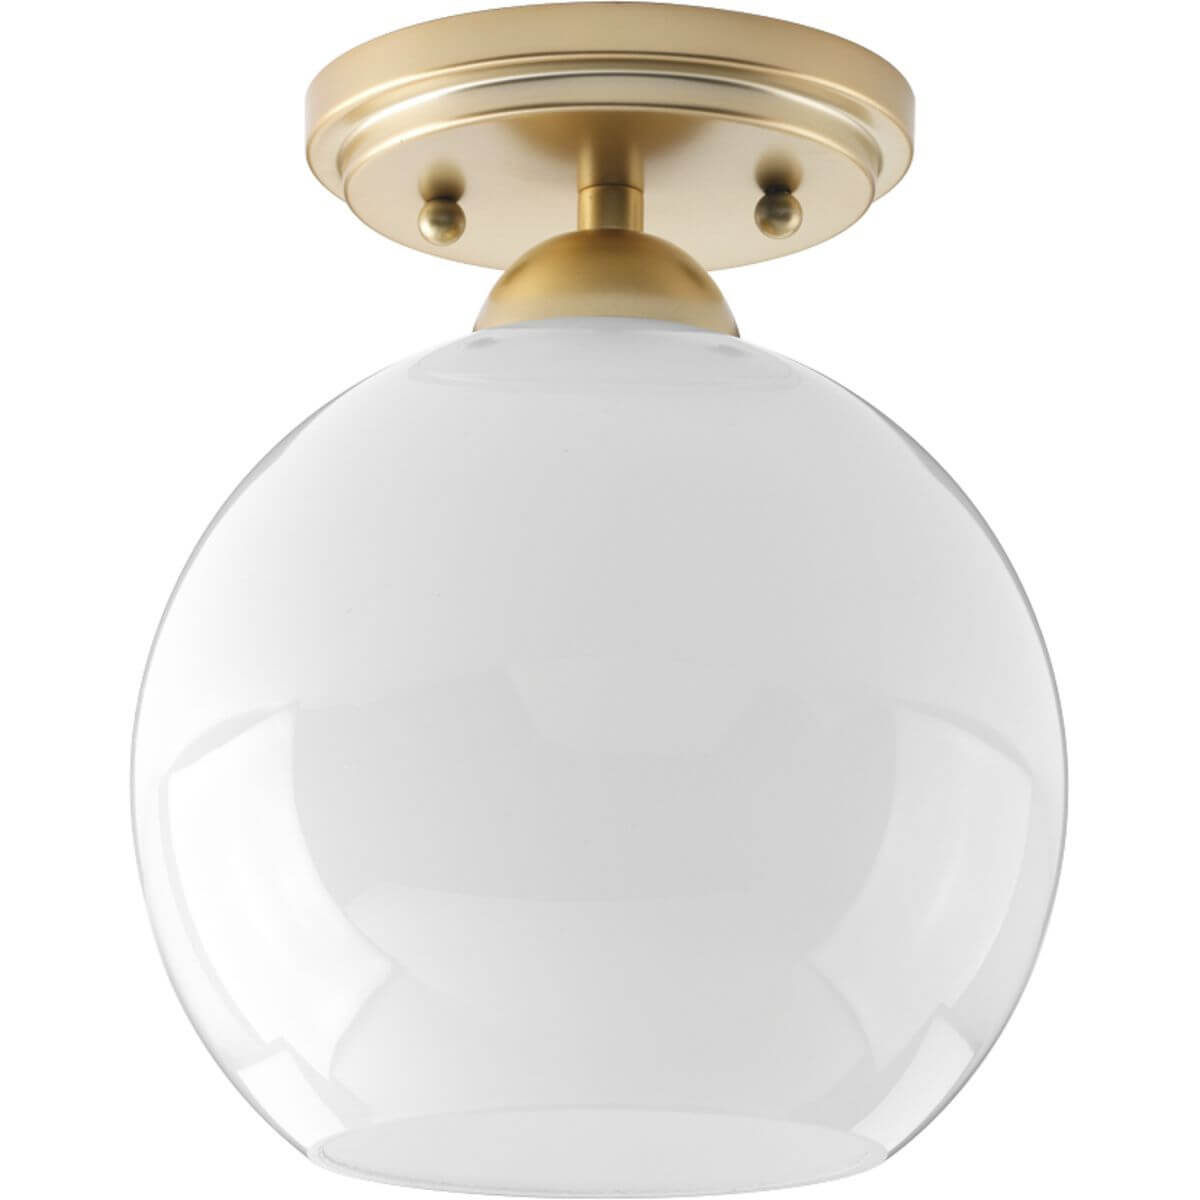 Progress Lighting P350075-078 Carisa 1 Light 7 inch Flush Mount in Vintage Gold with Opal Glass Shade